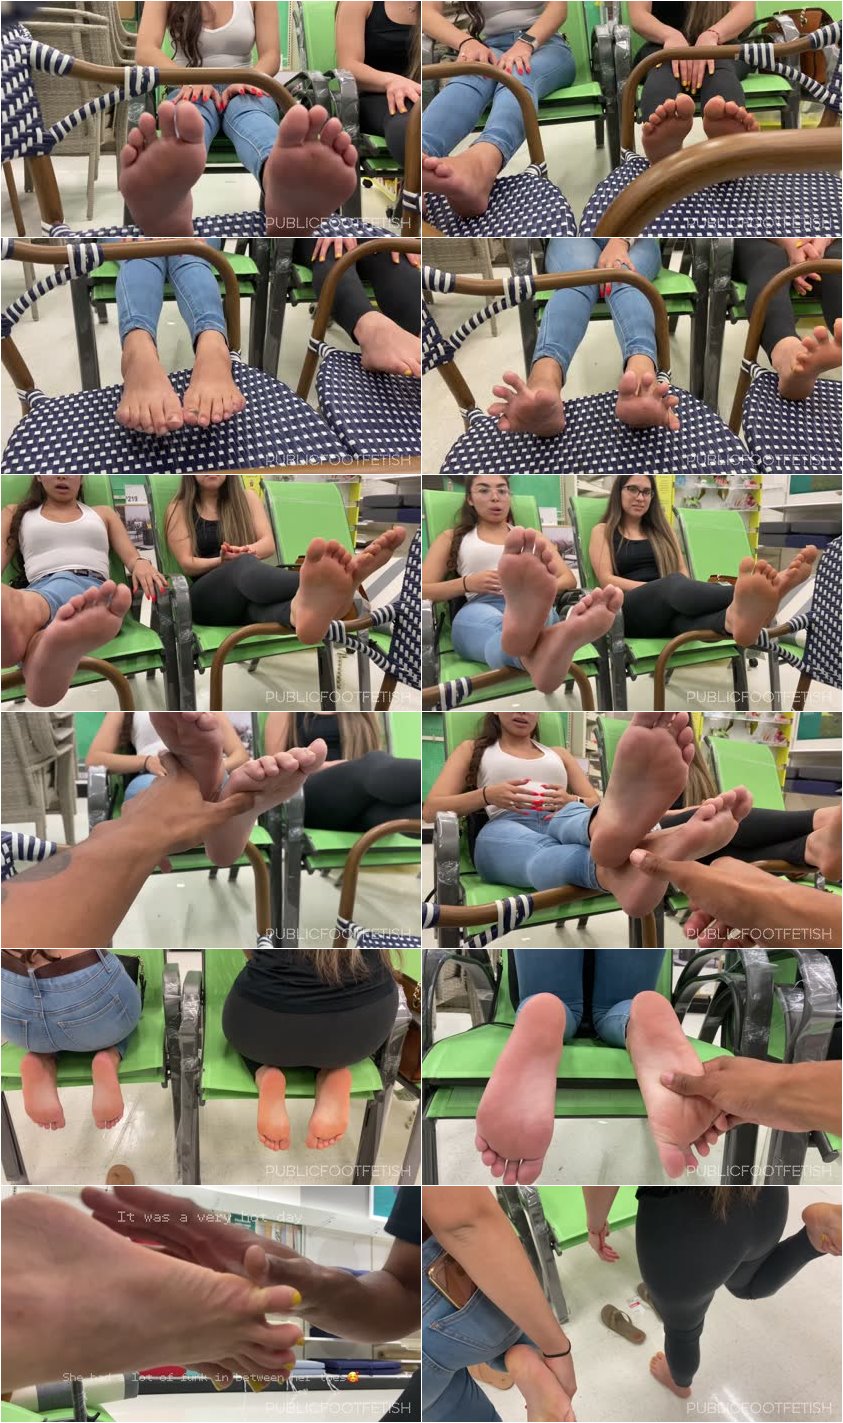 Latina friends Stephanie And Heather Beautiful toe wiggling feet sniffing Quarantine Foot Fetish - publicfootfetish picture